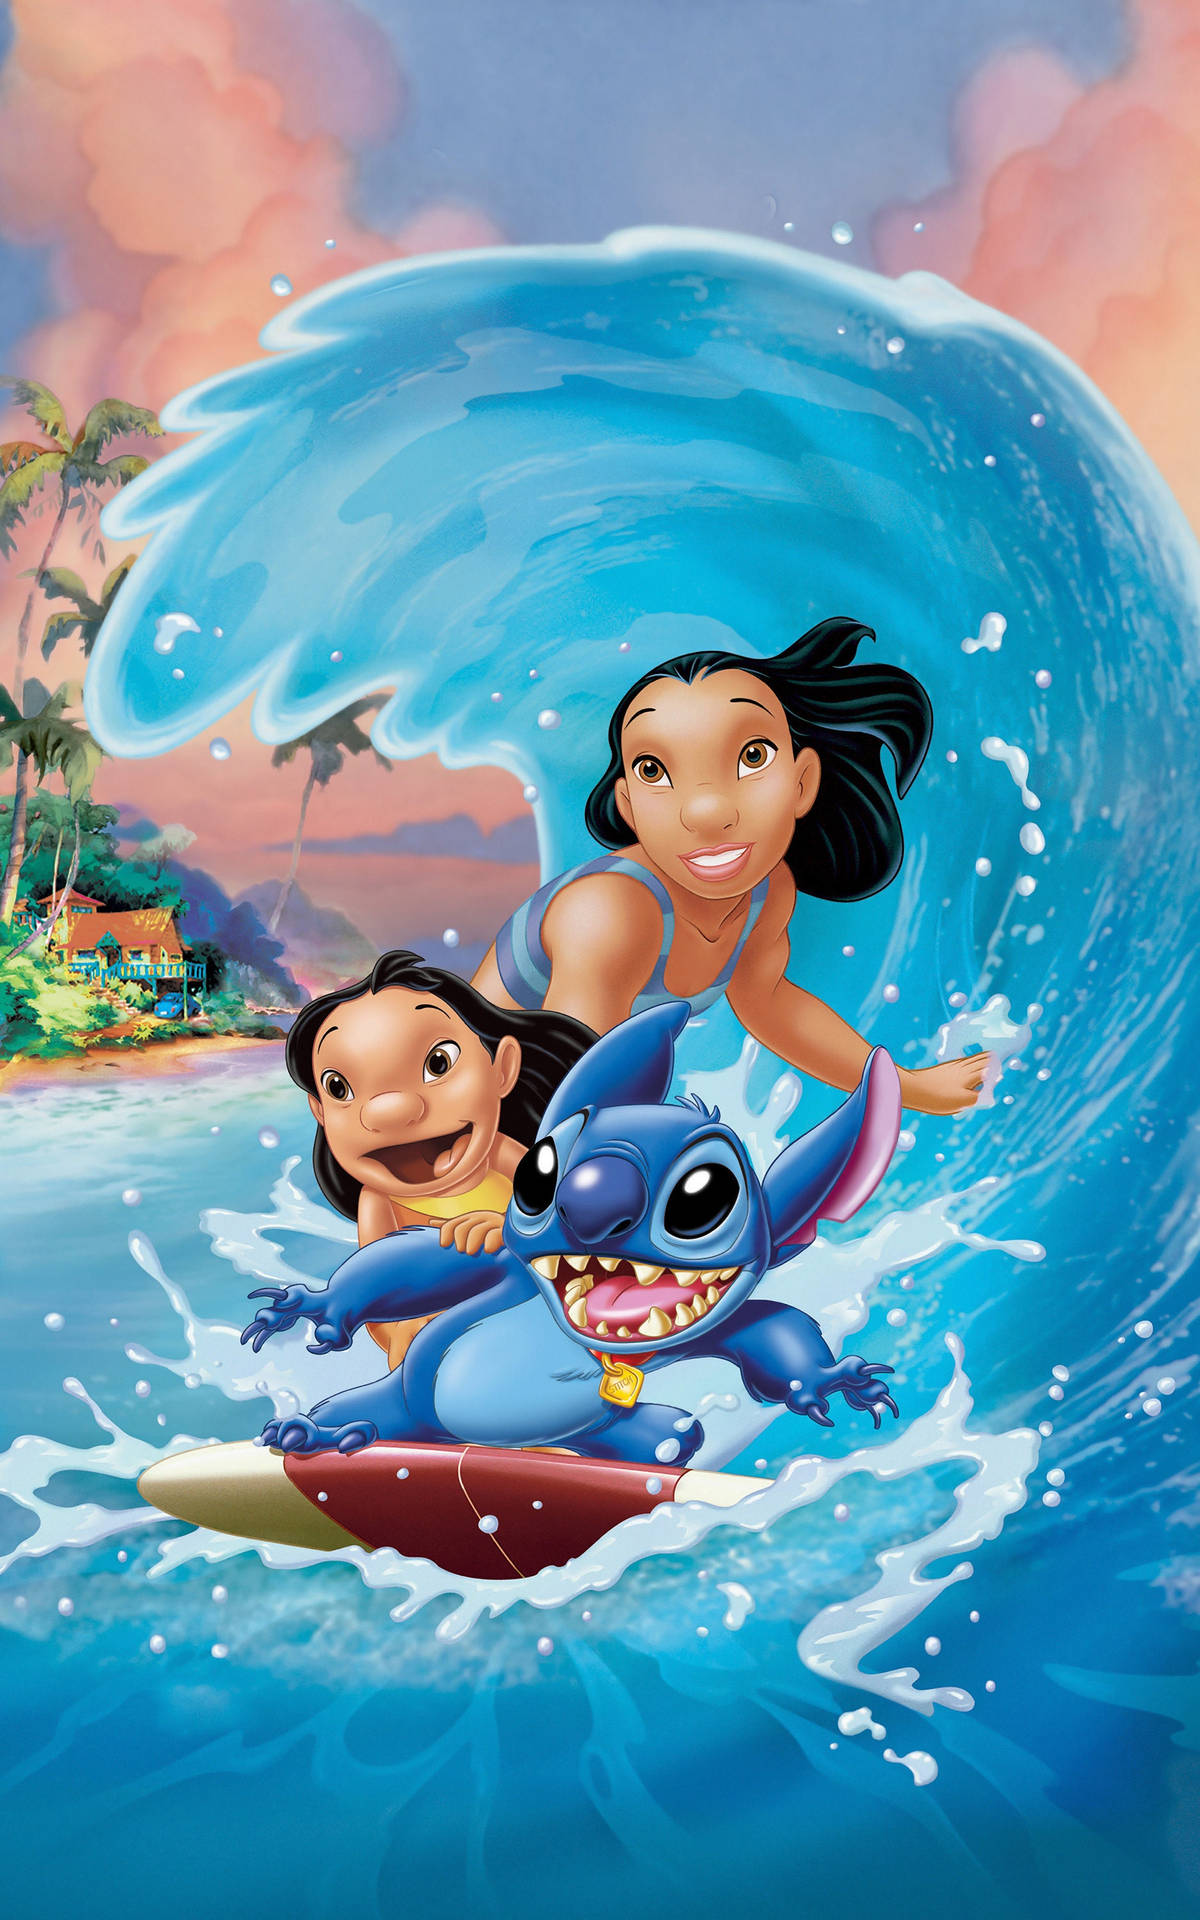 Adorable 3d Render Of Character Stitch From Disney's Lilo And Stitch Wallpaper